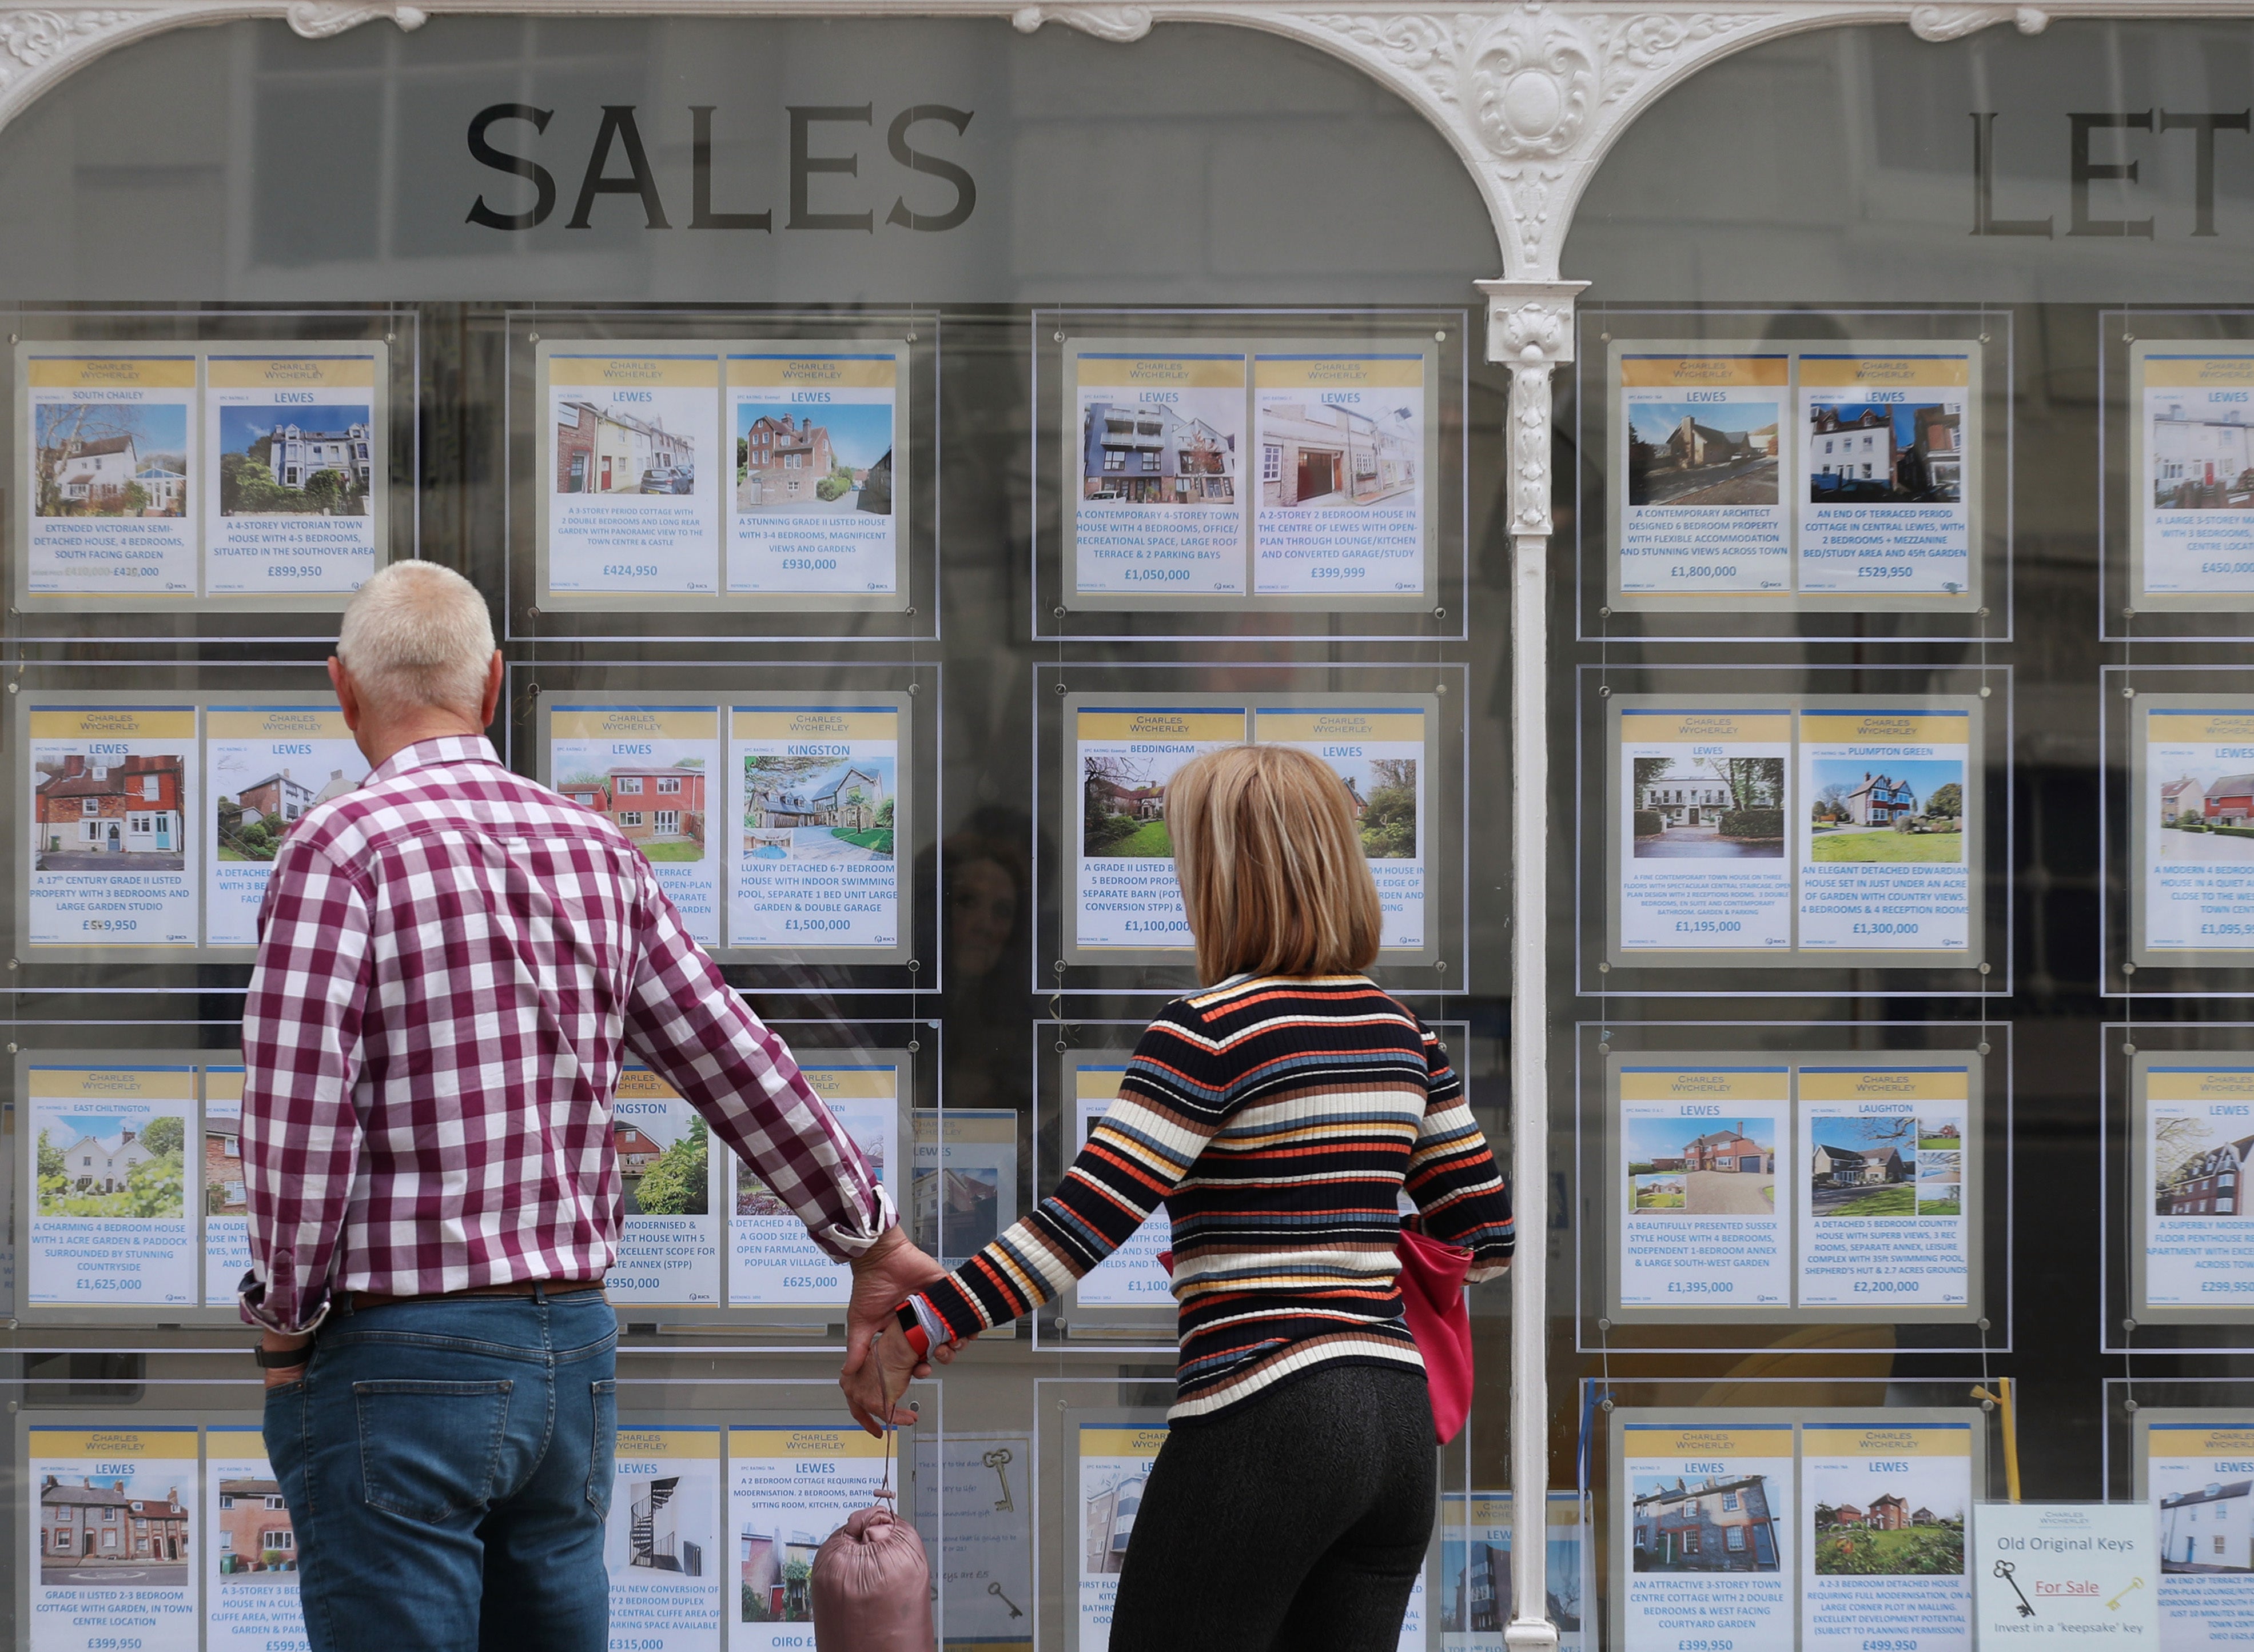 Nine in 10 people looking to buy a home believe a lack of available housing is negatively affecting their ability to make a purchase, according to Savills (Yui Mok/PA)